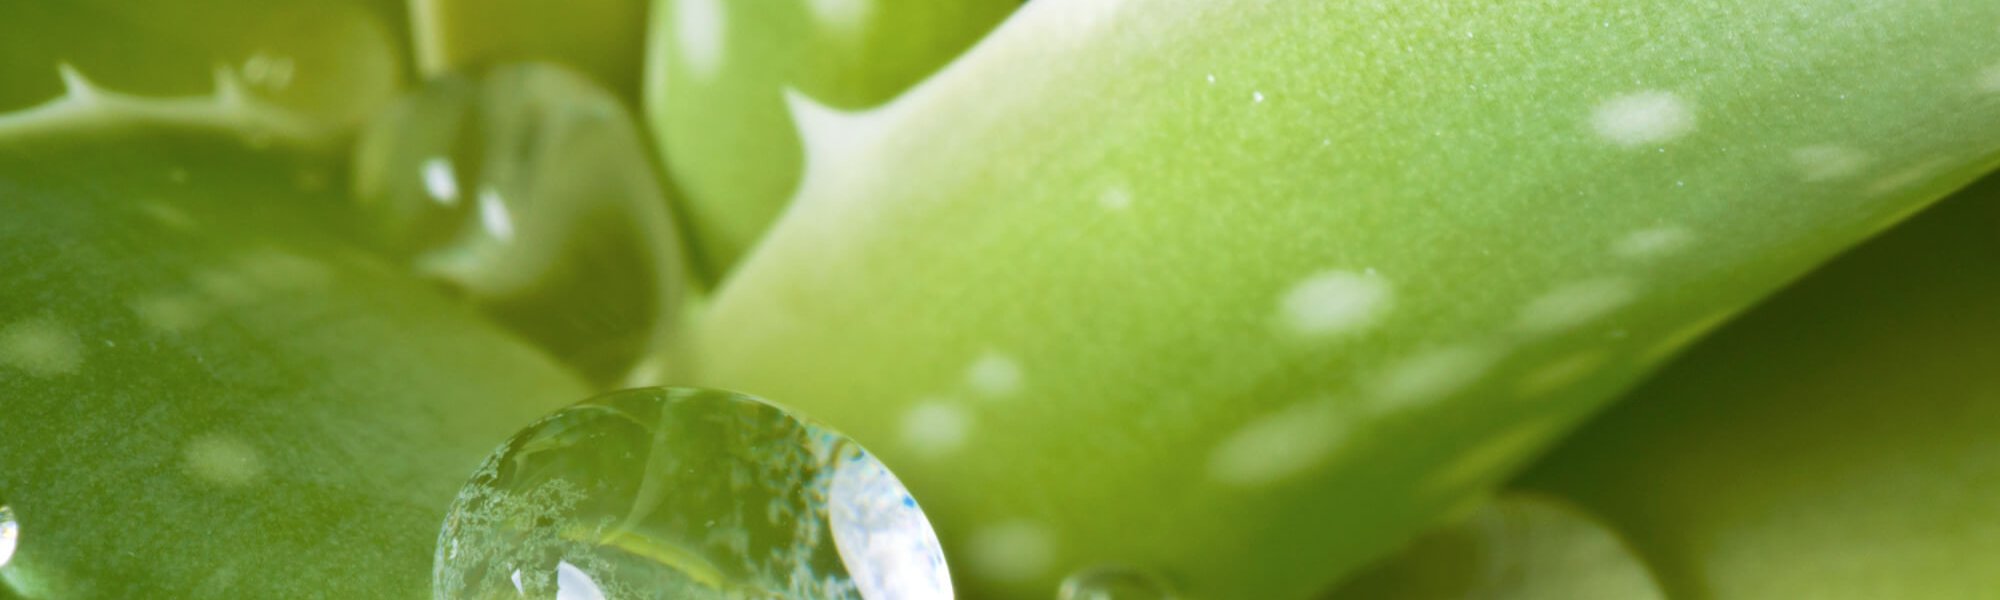 Aloe Vera For The Skin How To Use This Miracle Plant Hero